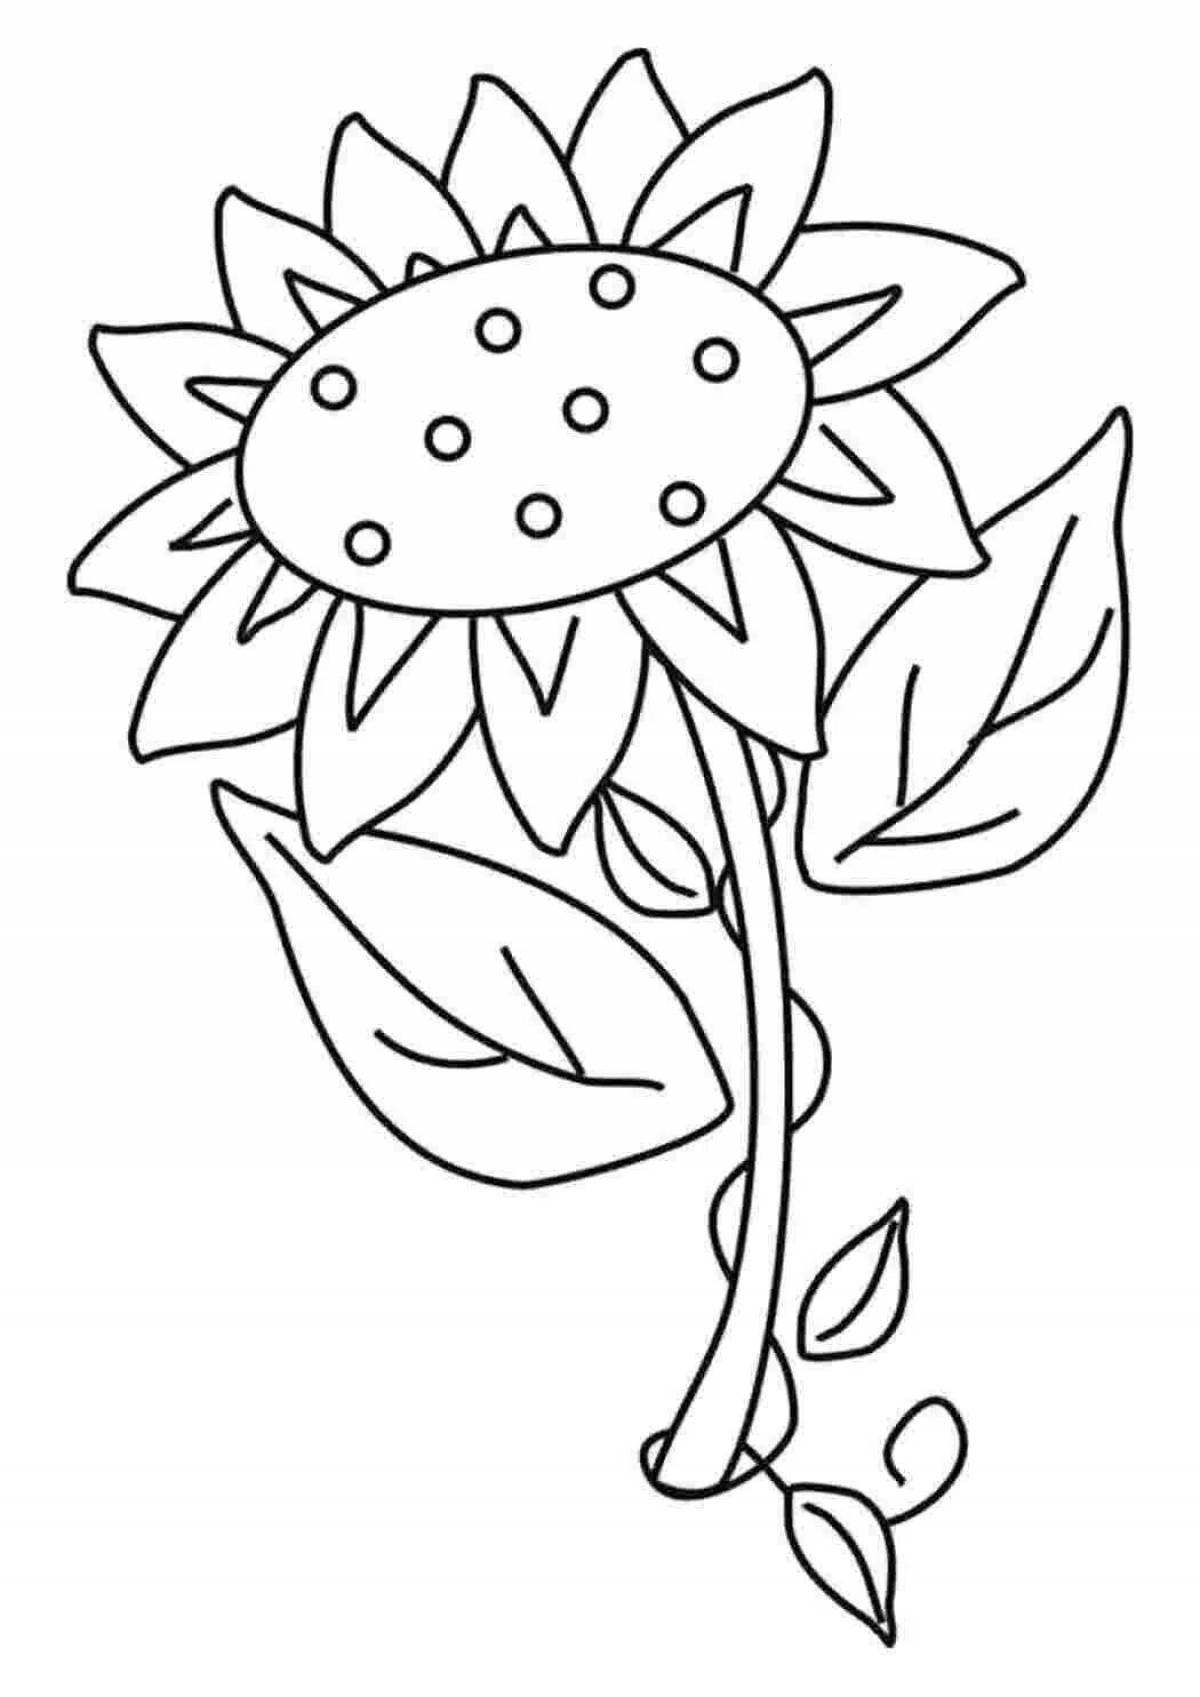 Adorable flower coloring book for kids 3 4